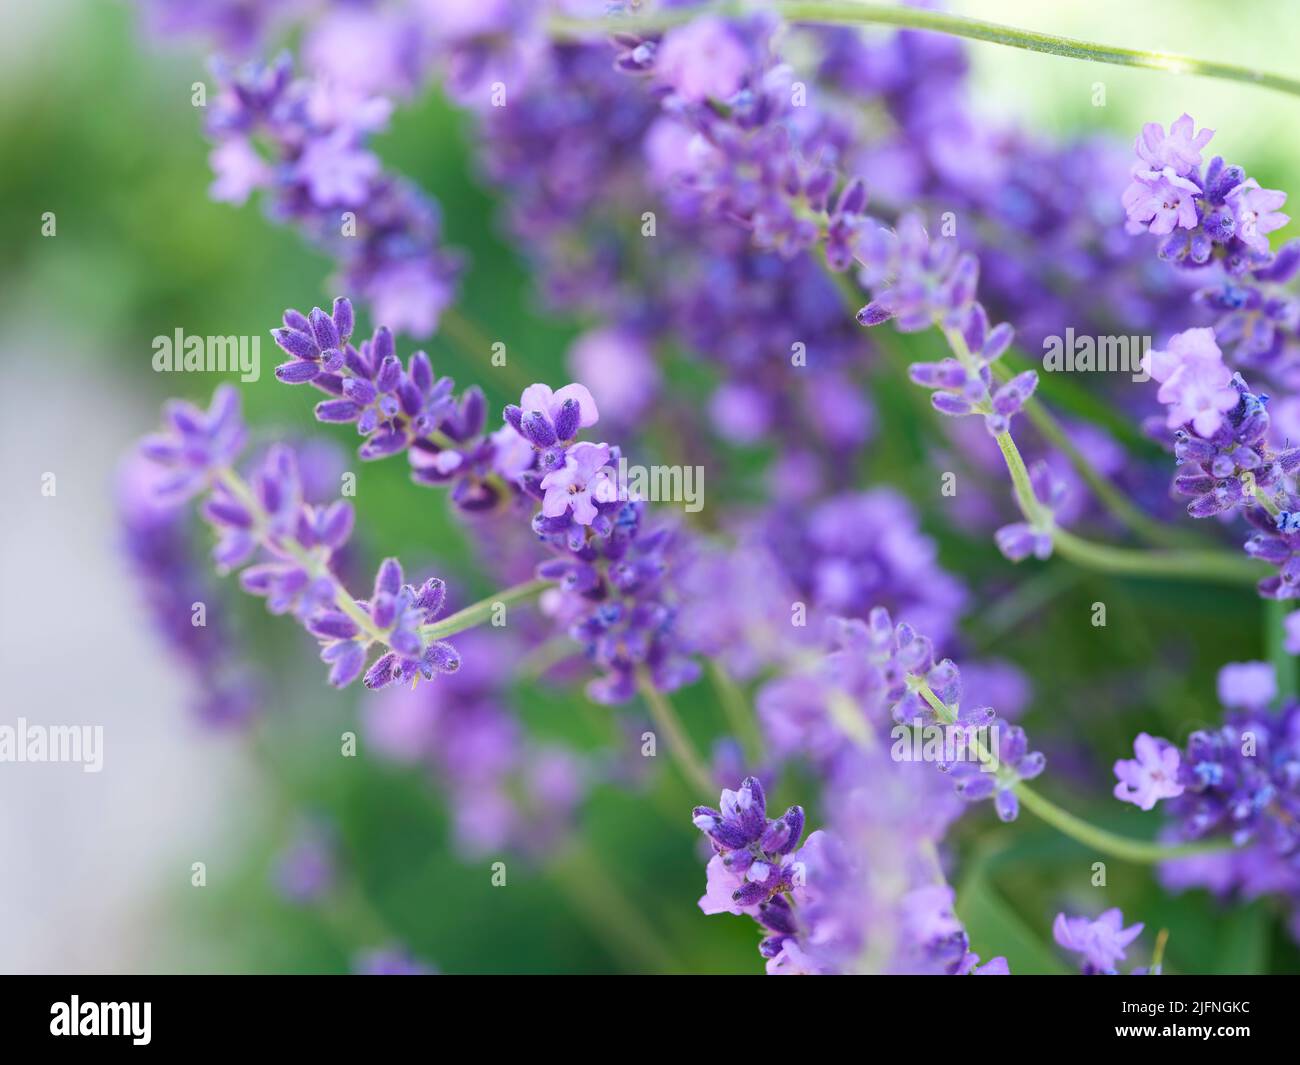 A close-up shot of beautiful Lavender flowers Stock Photo